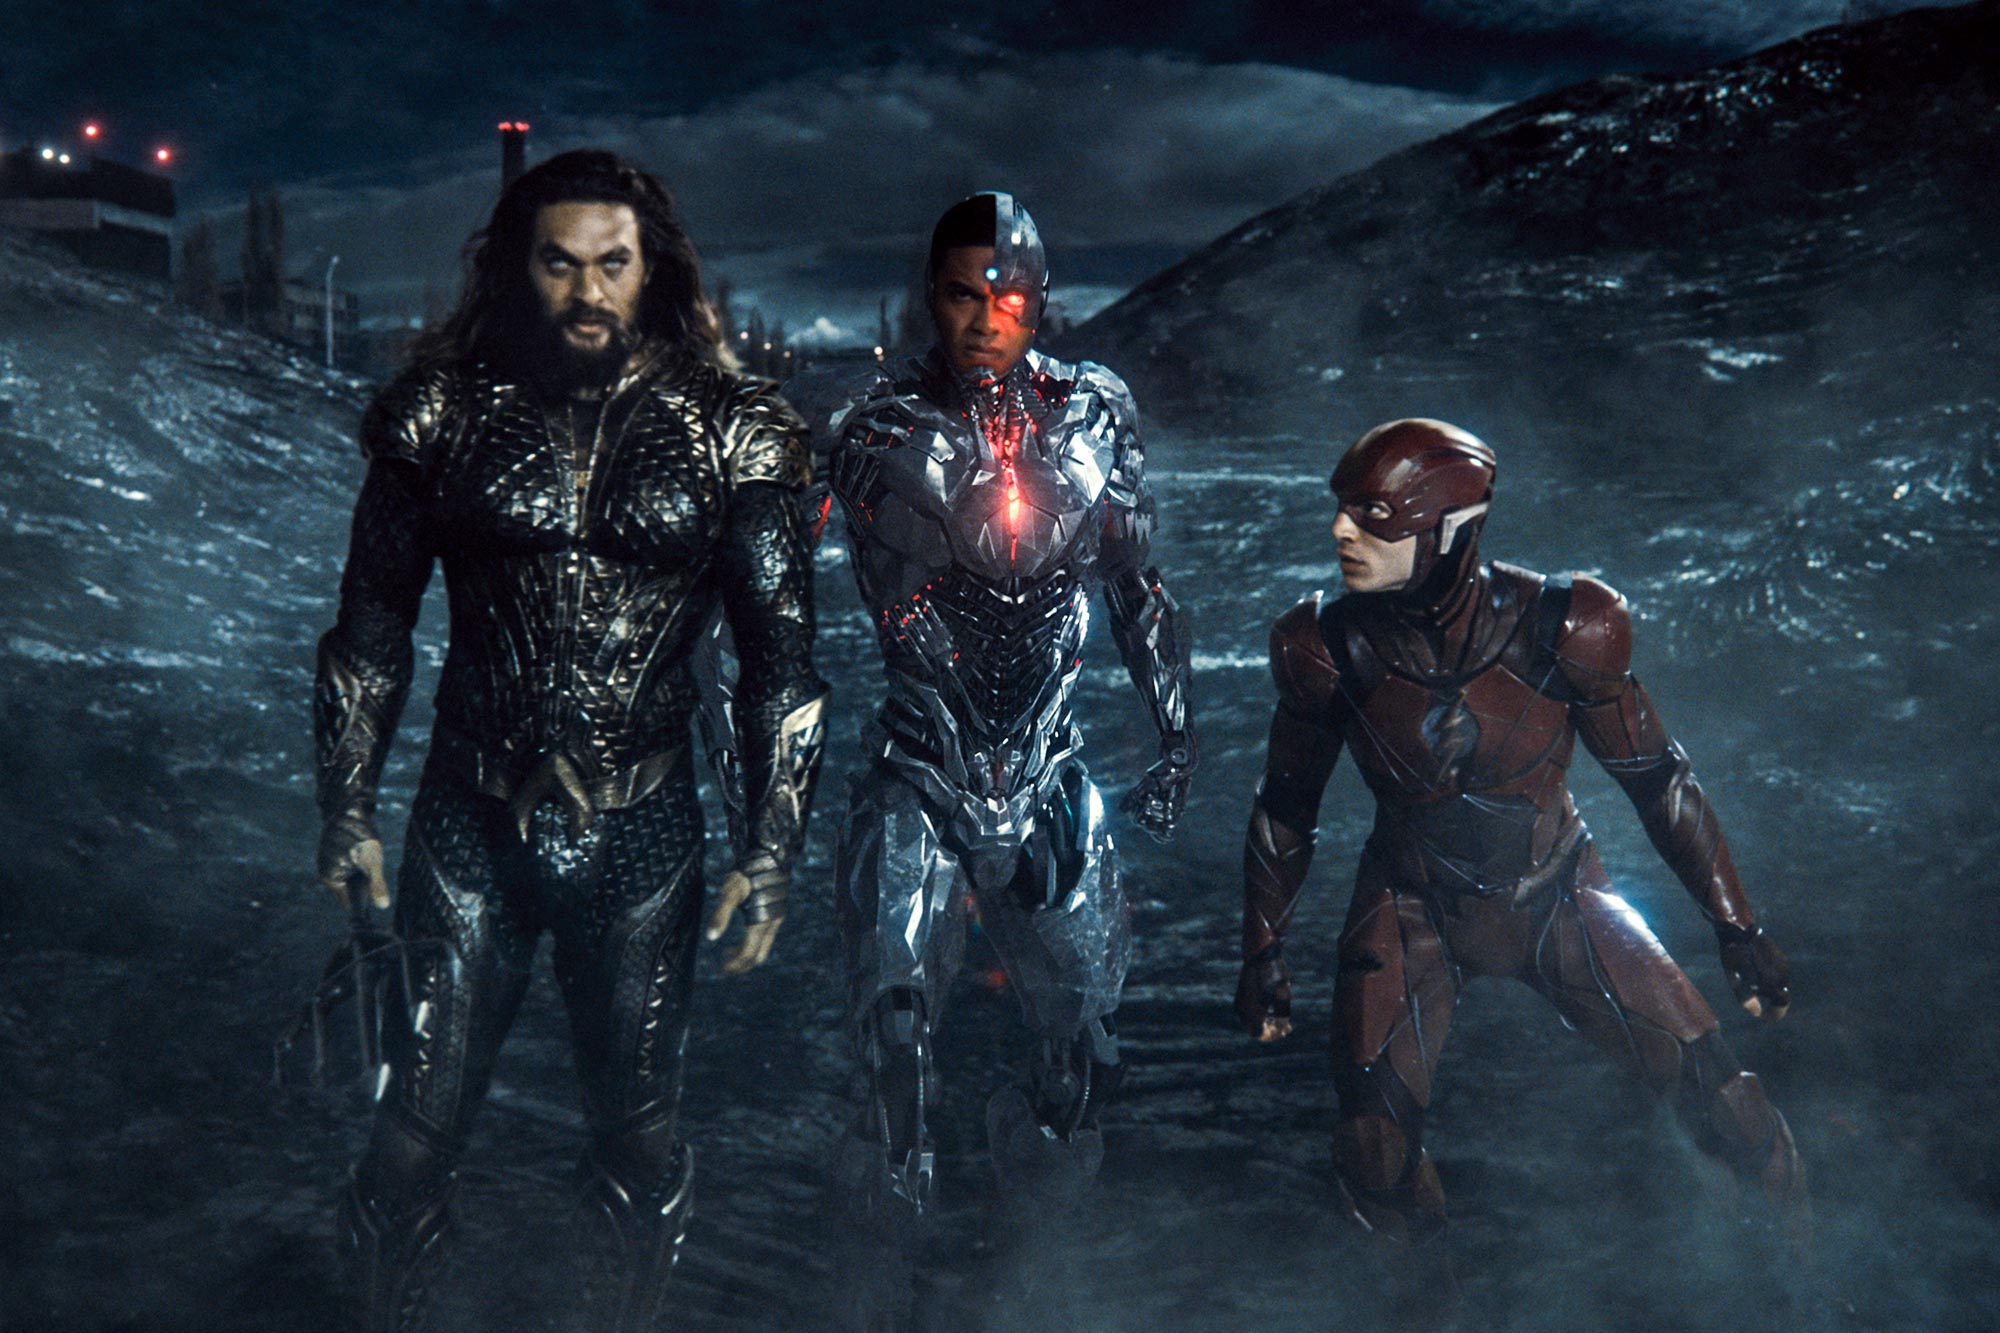 (From left) Aquaman, Cyborg, and The Flash prepare to attack Steppenwolf (Source: Warner Bros). 